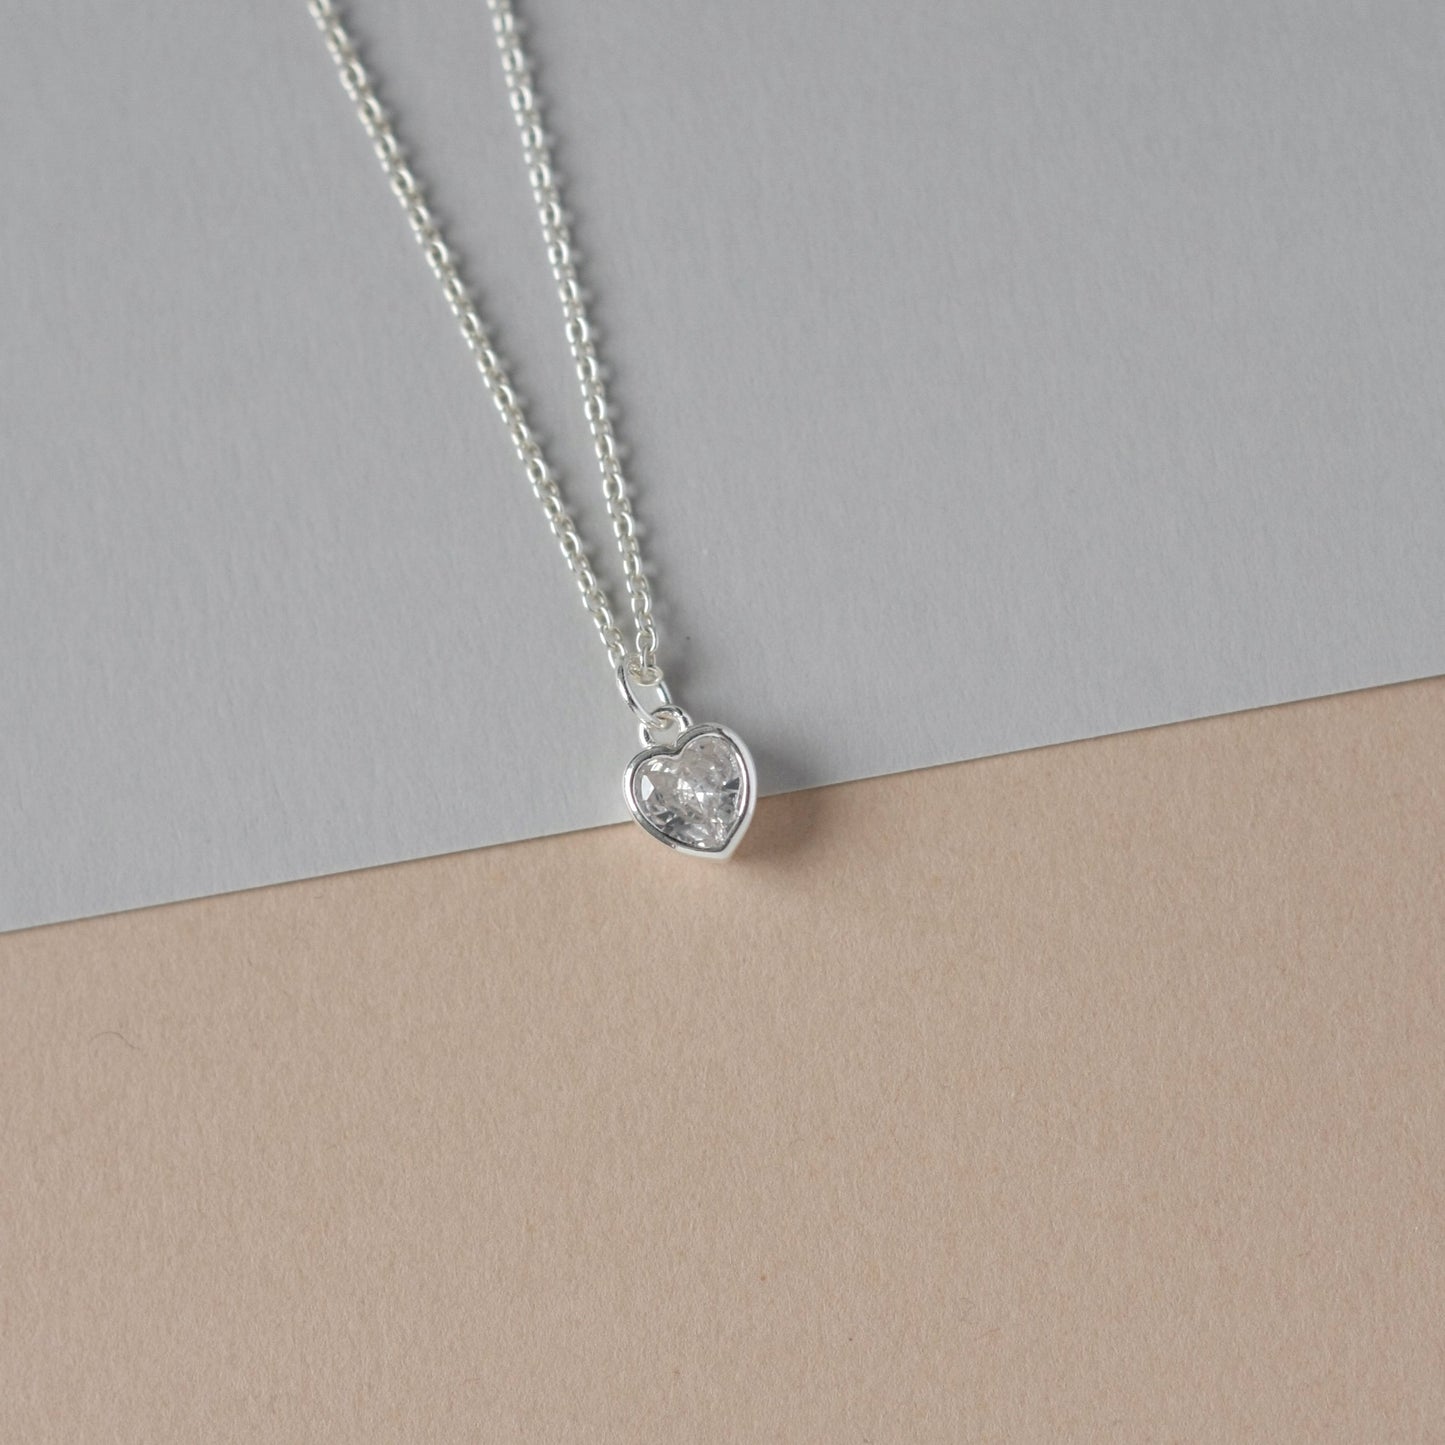 Dainty Sparkly Silver Heart Necklace